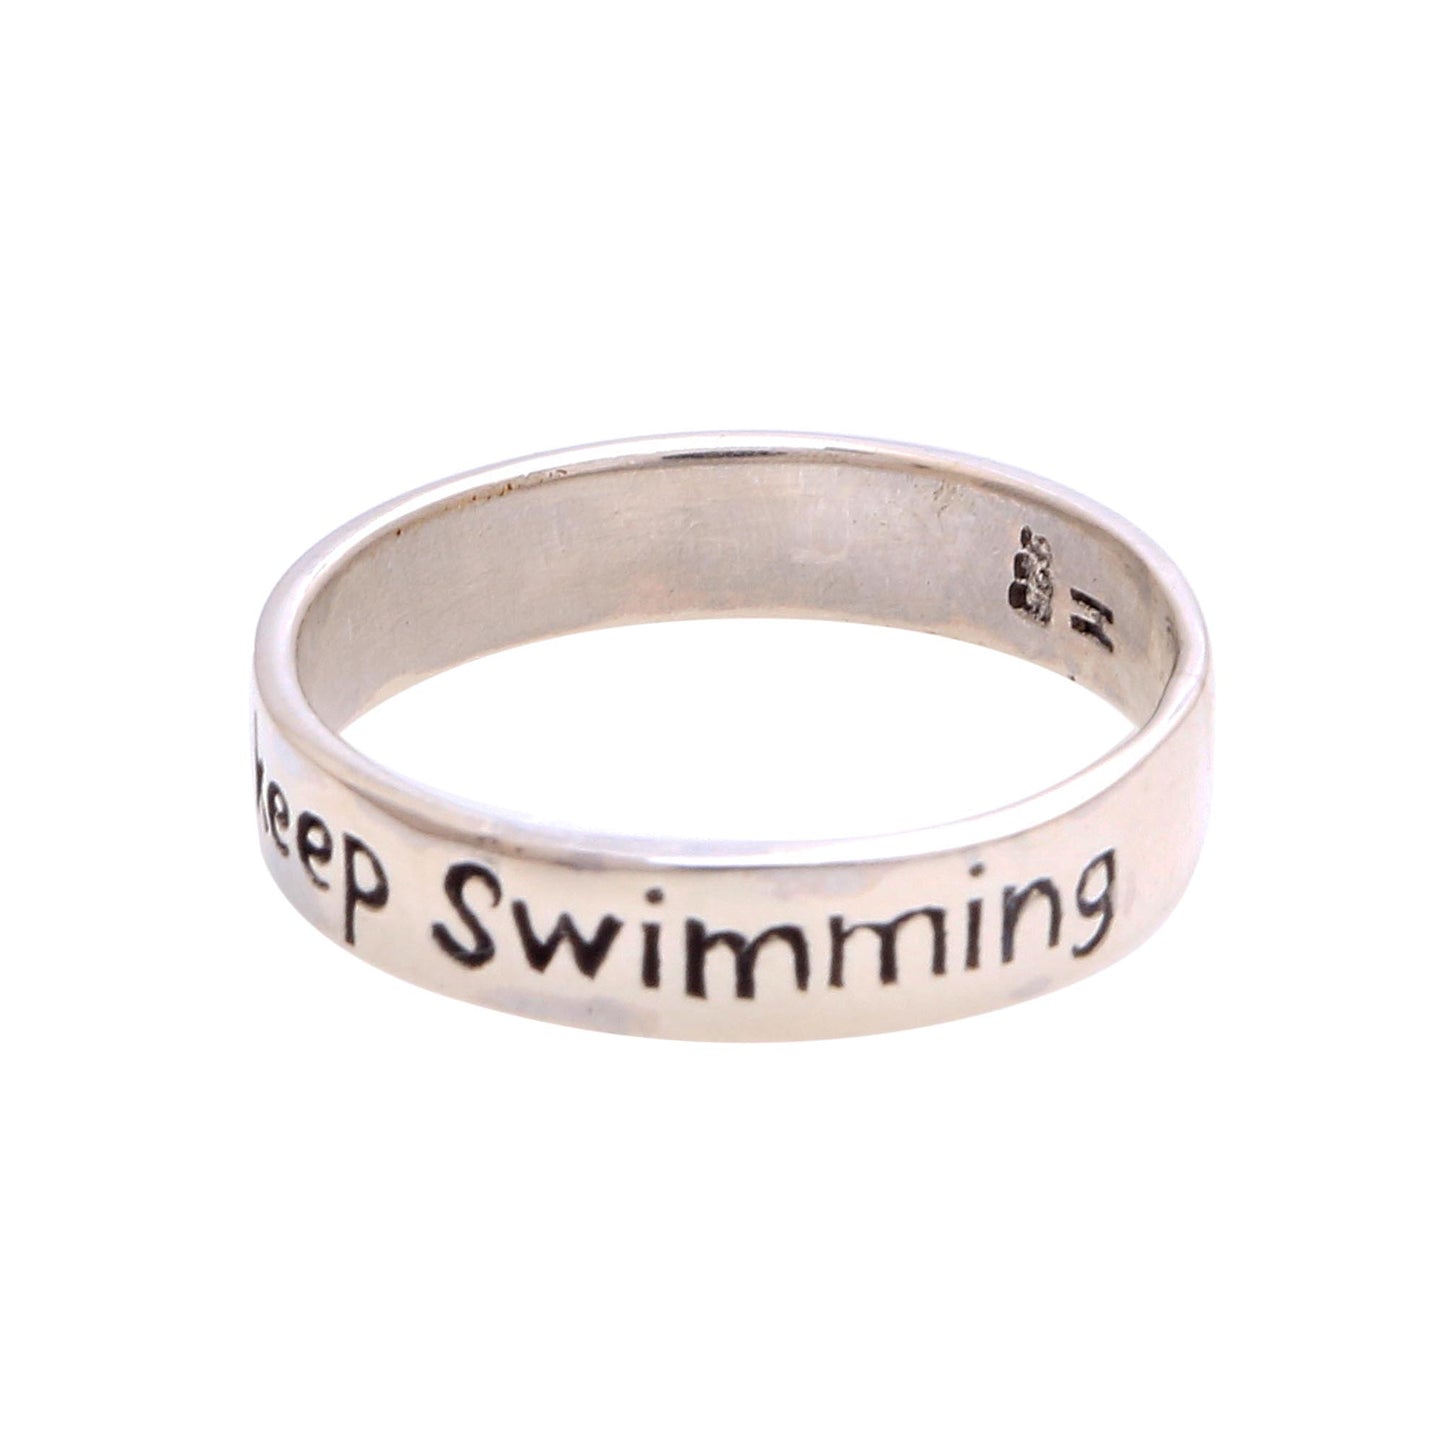 Just Keep Swimming Inspirational Sterling Silver Band Ring from Bali